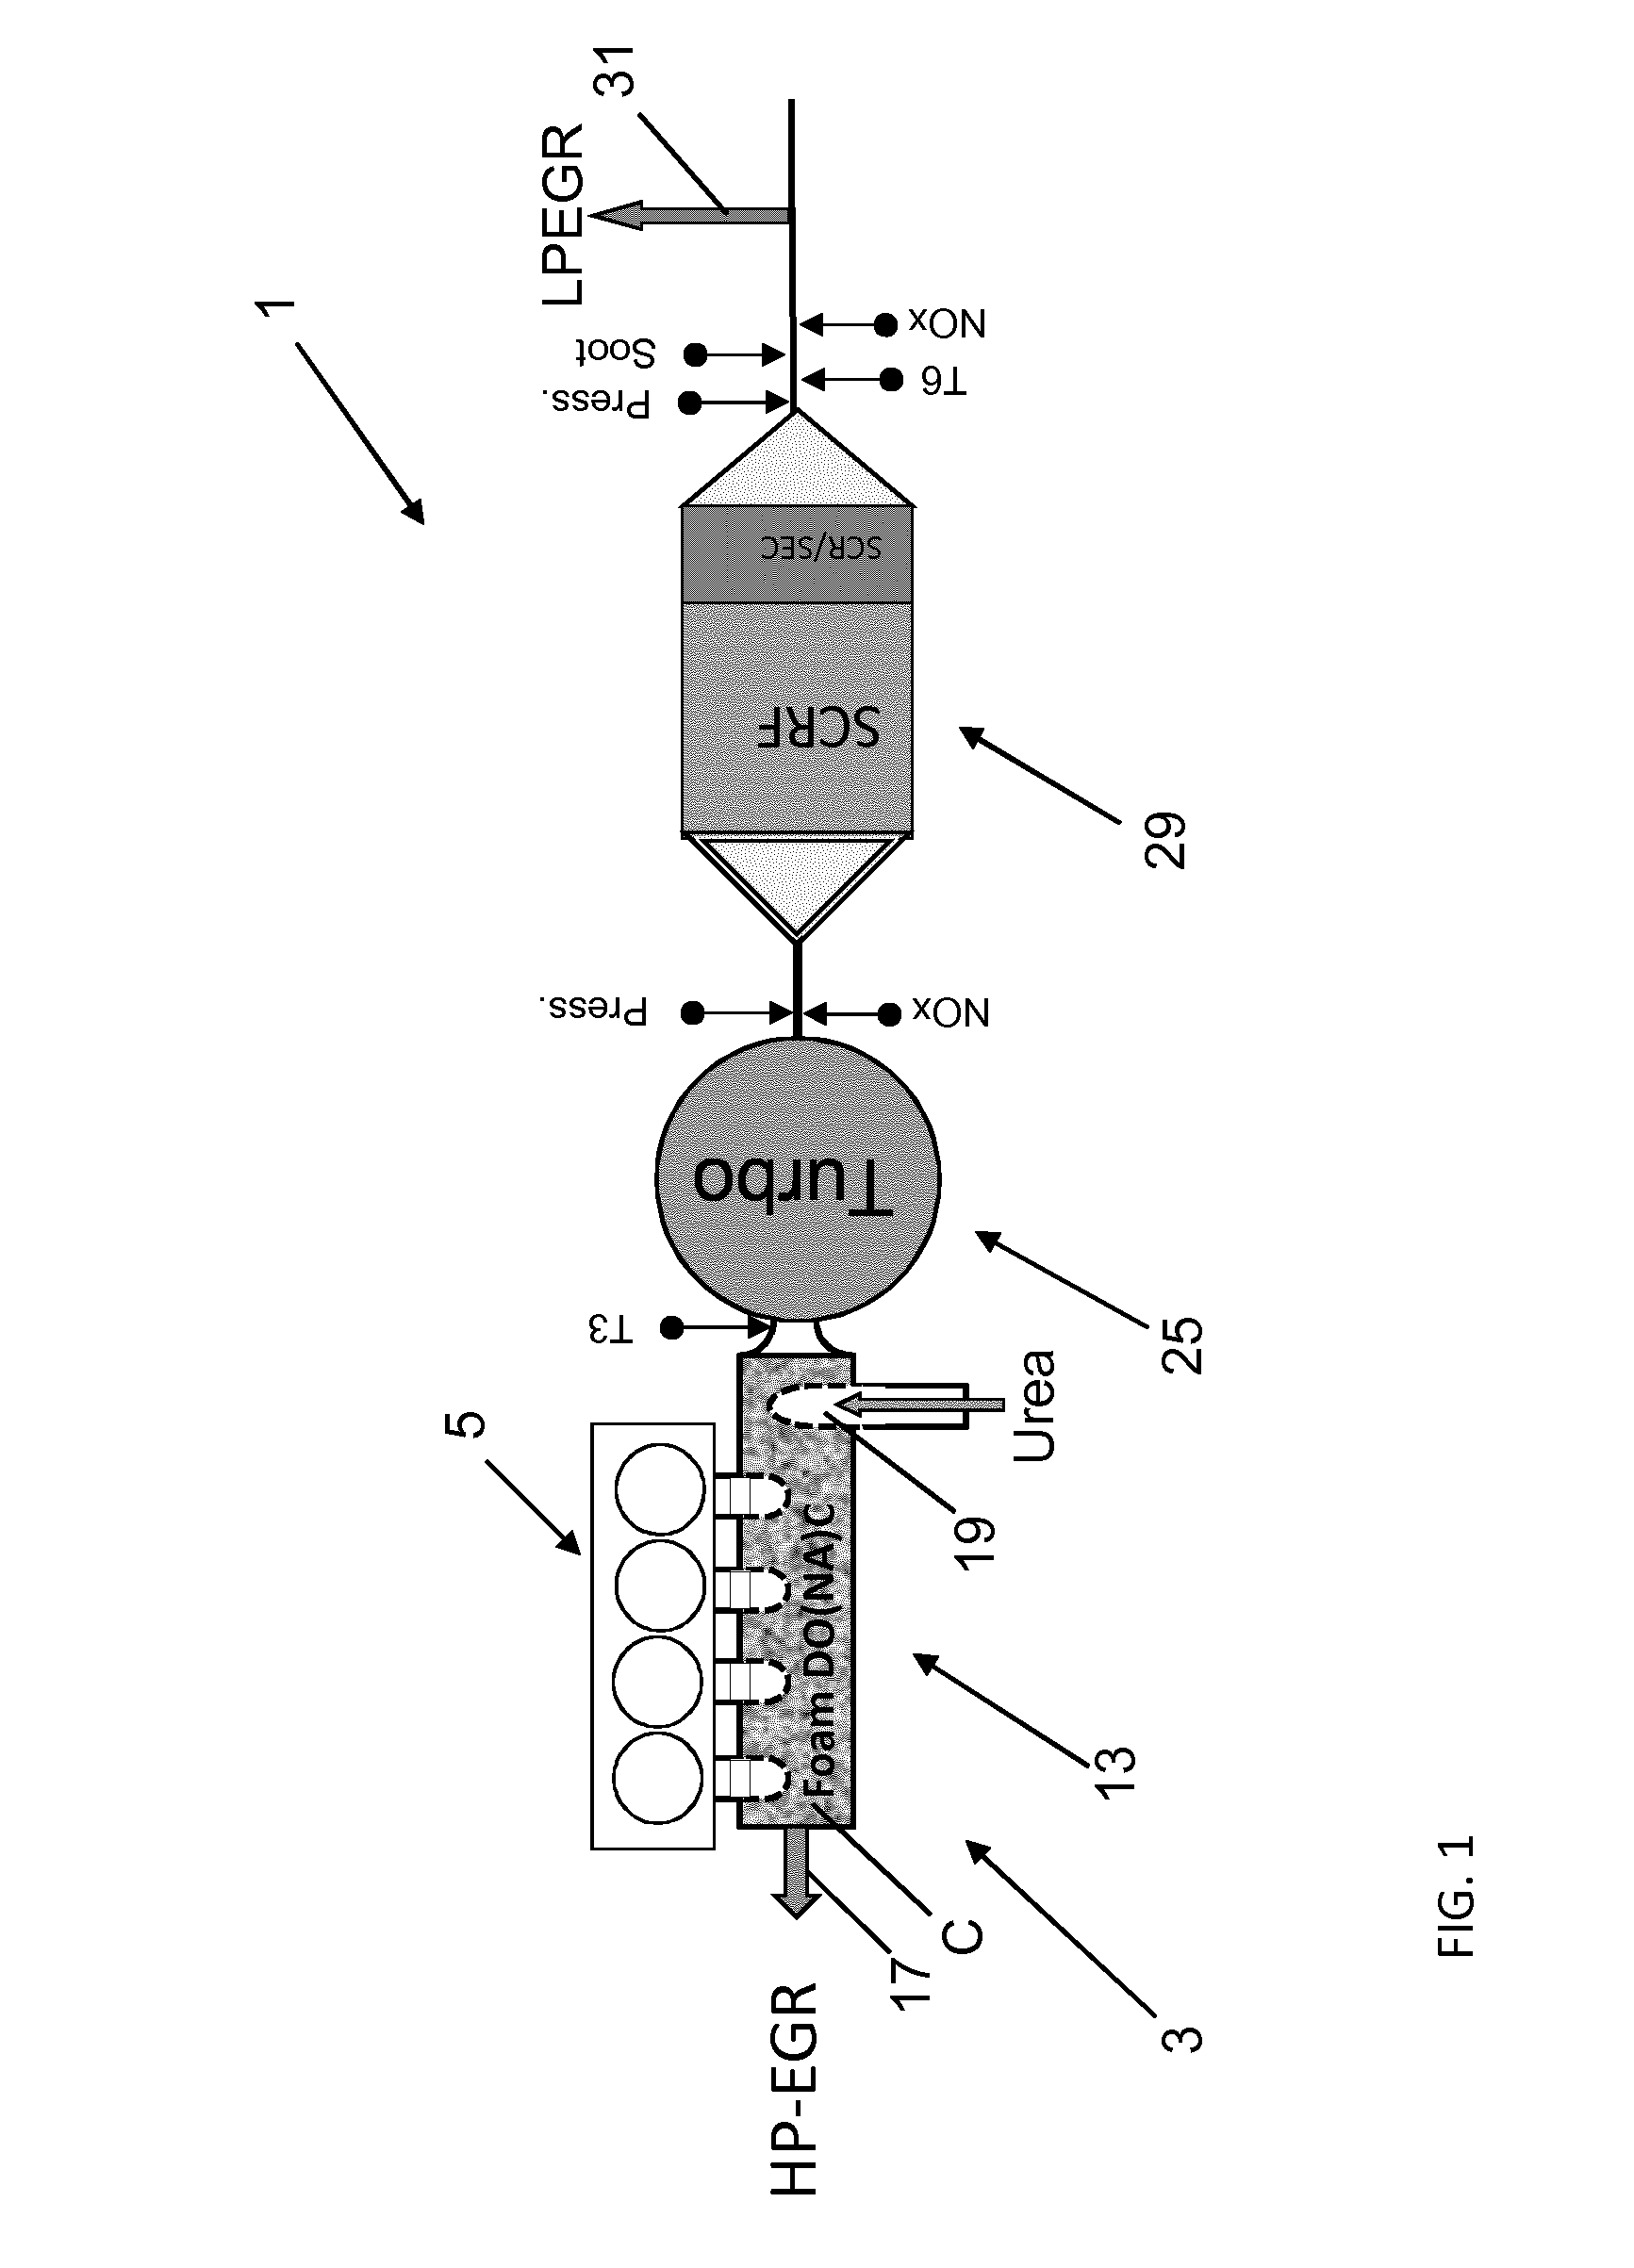 Exhaust treatment apparatus and method